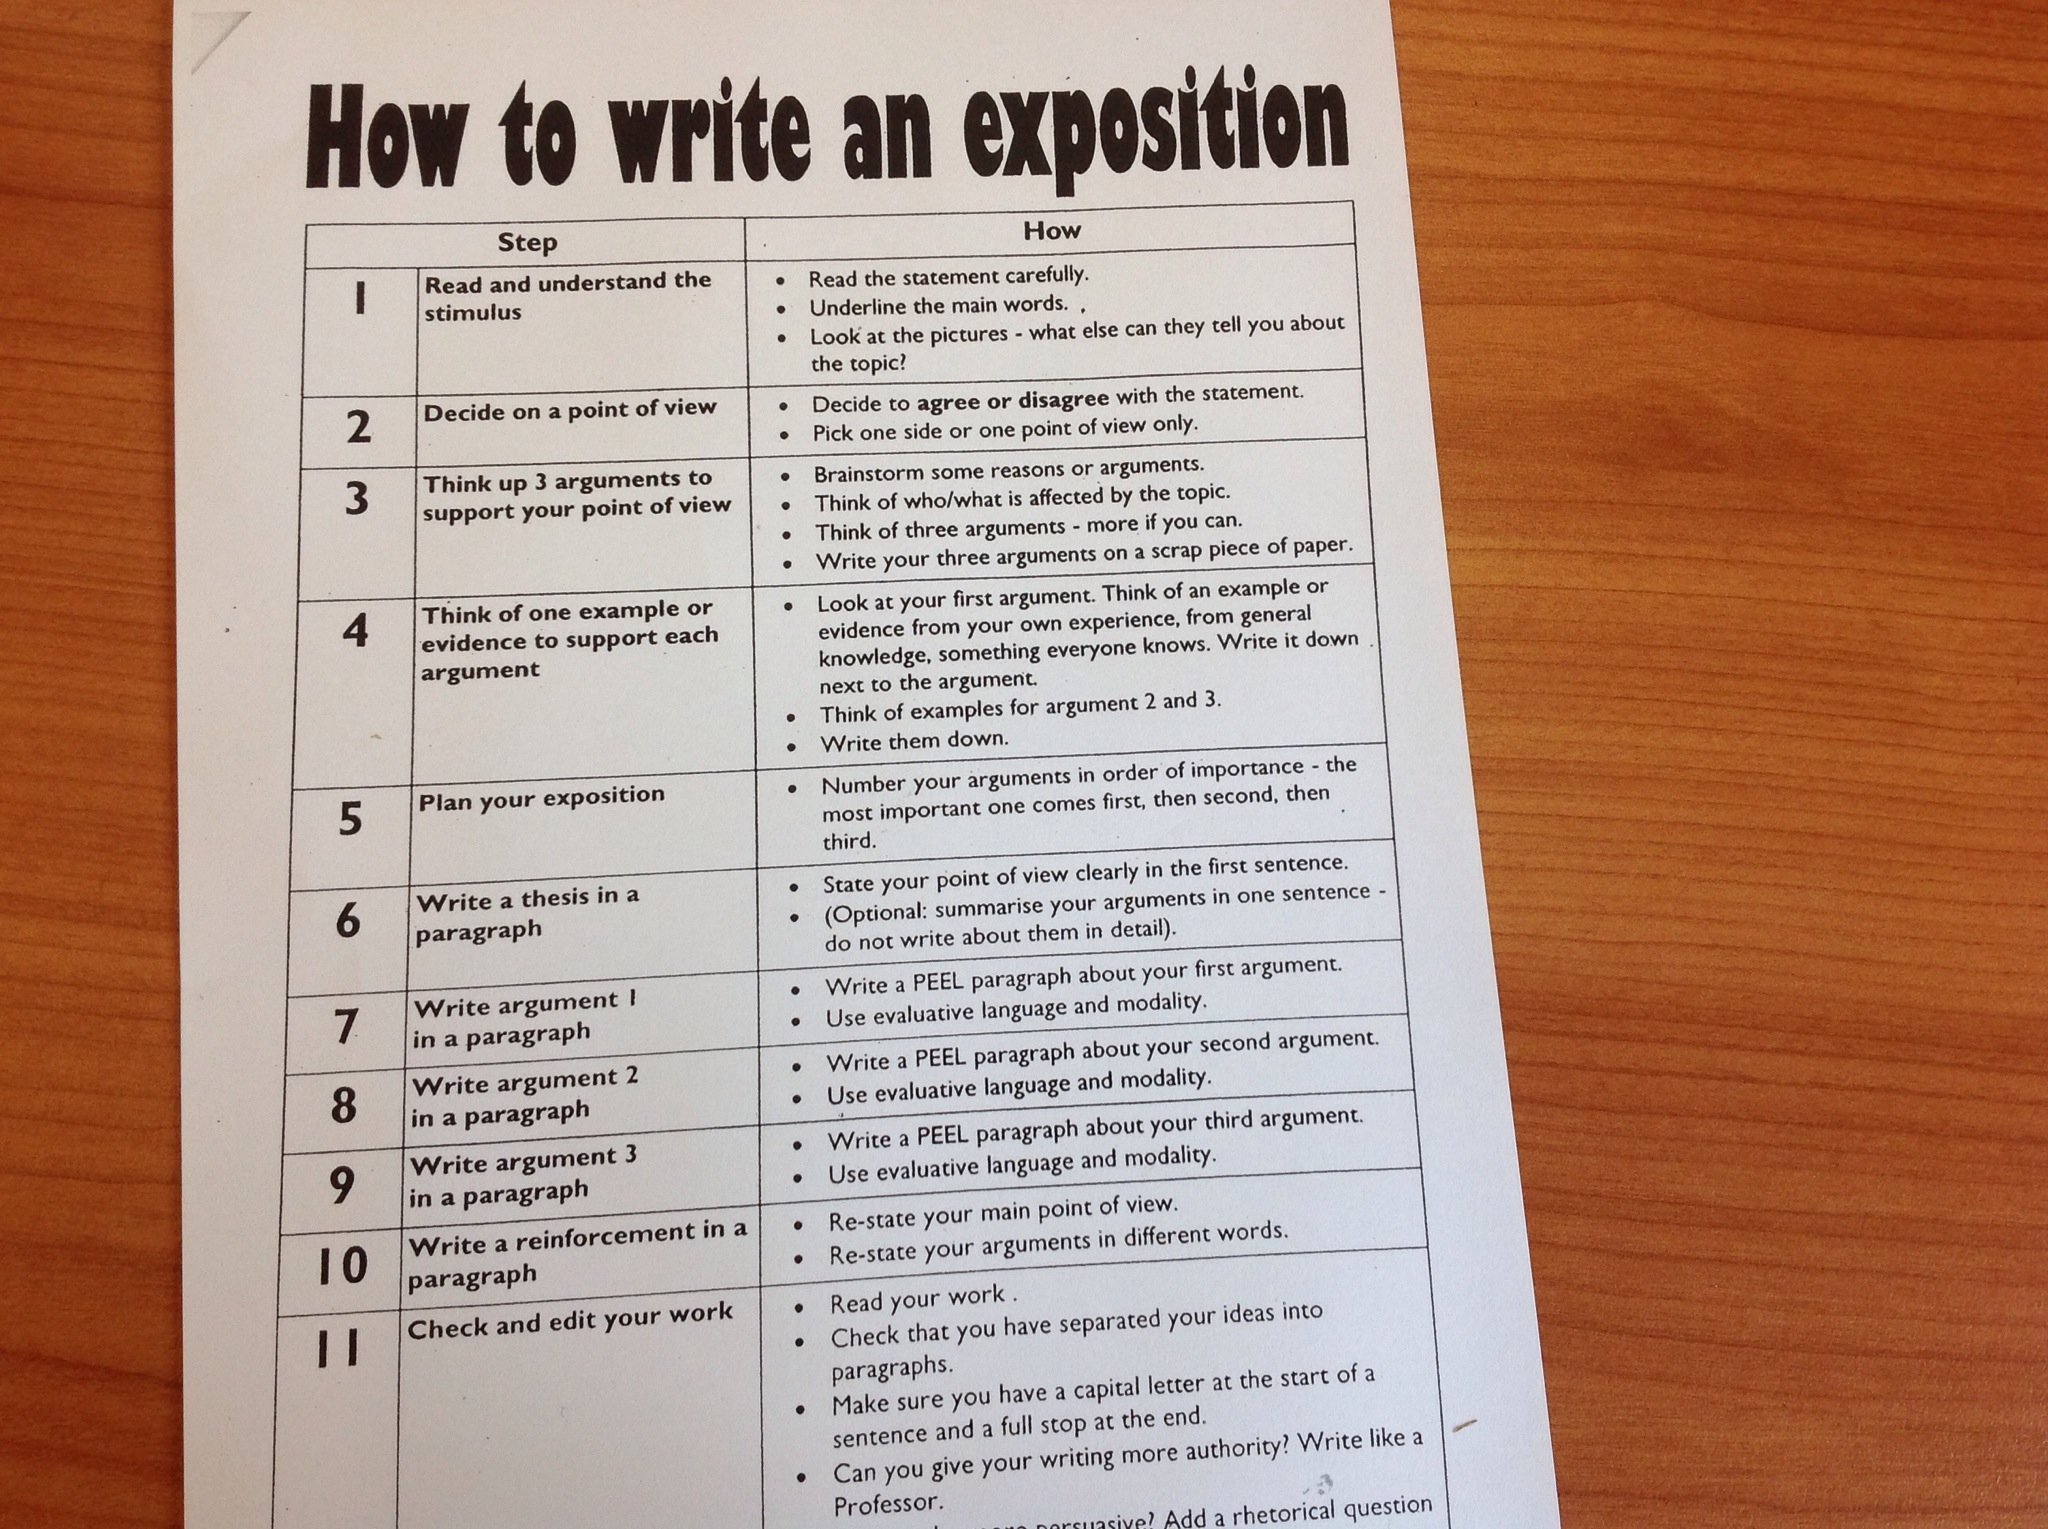 How to write an exposition - B+C Guides